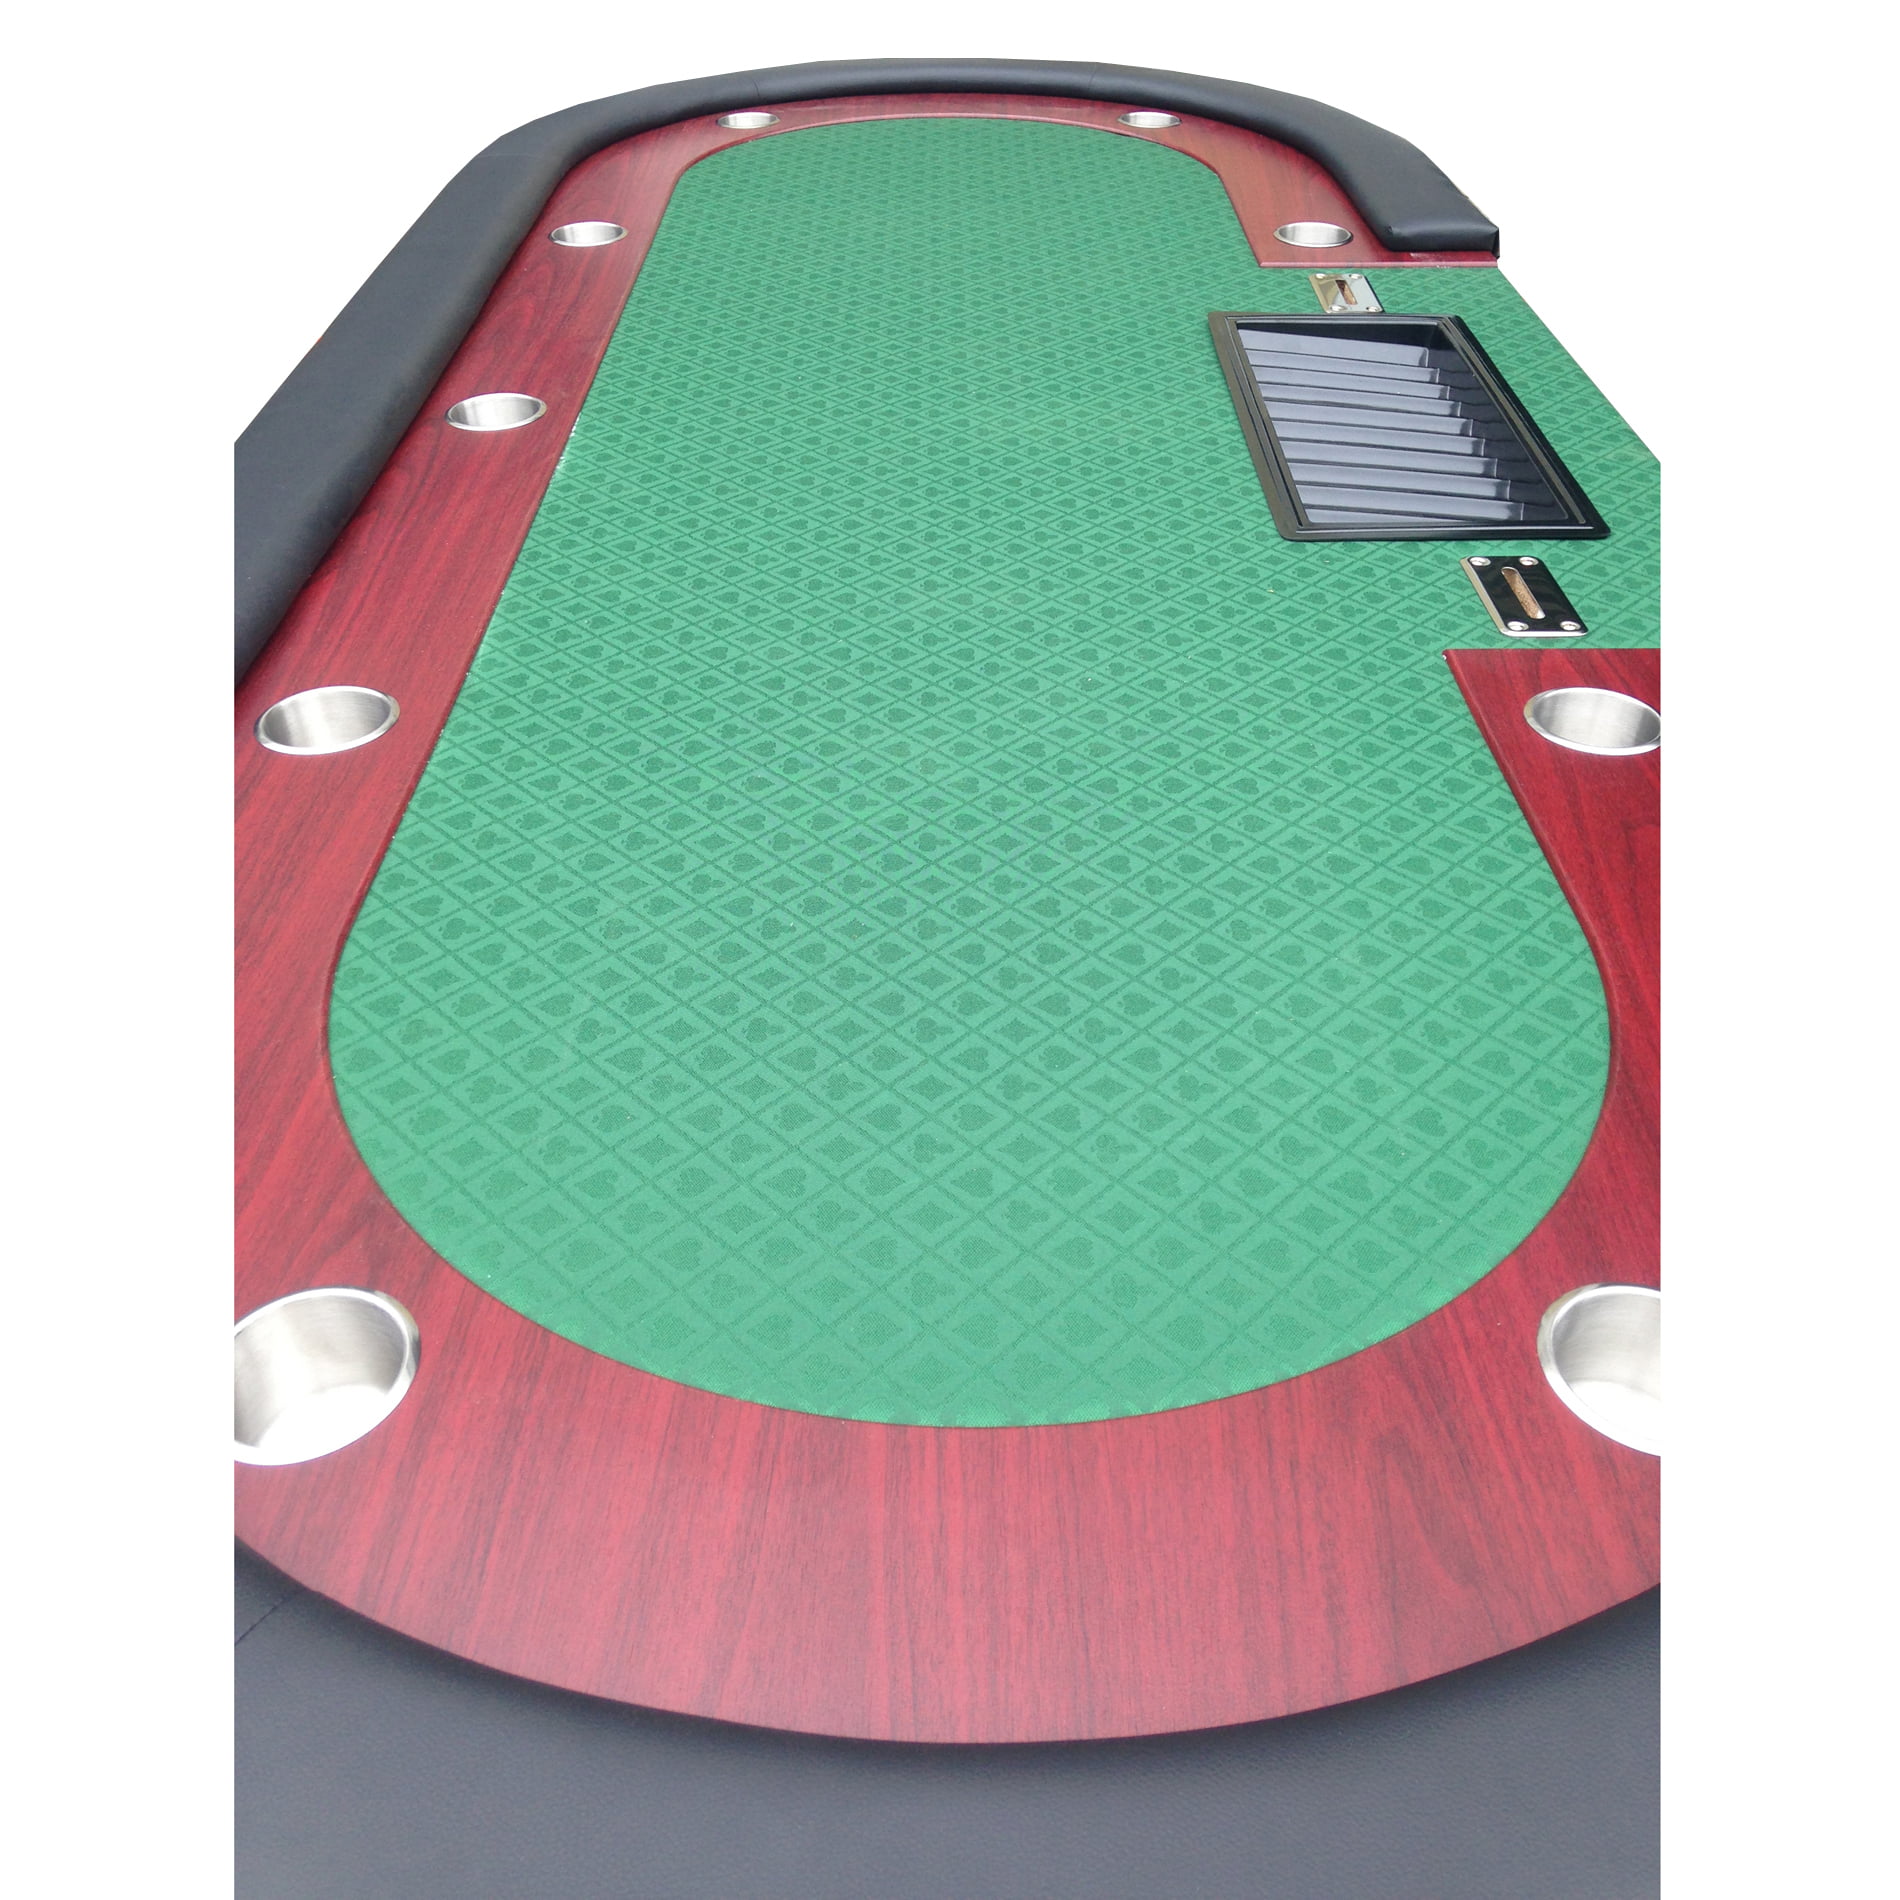  Toyvian 12pcs Poker Stand Gifts Under 25 Dollars for